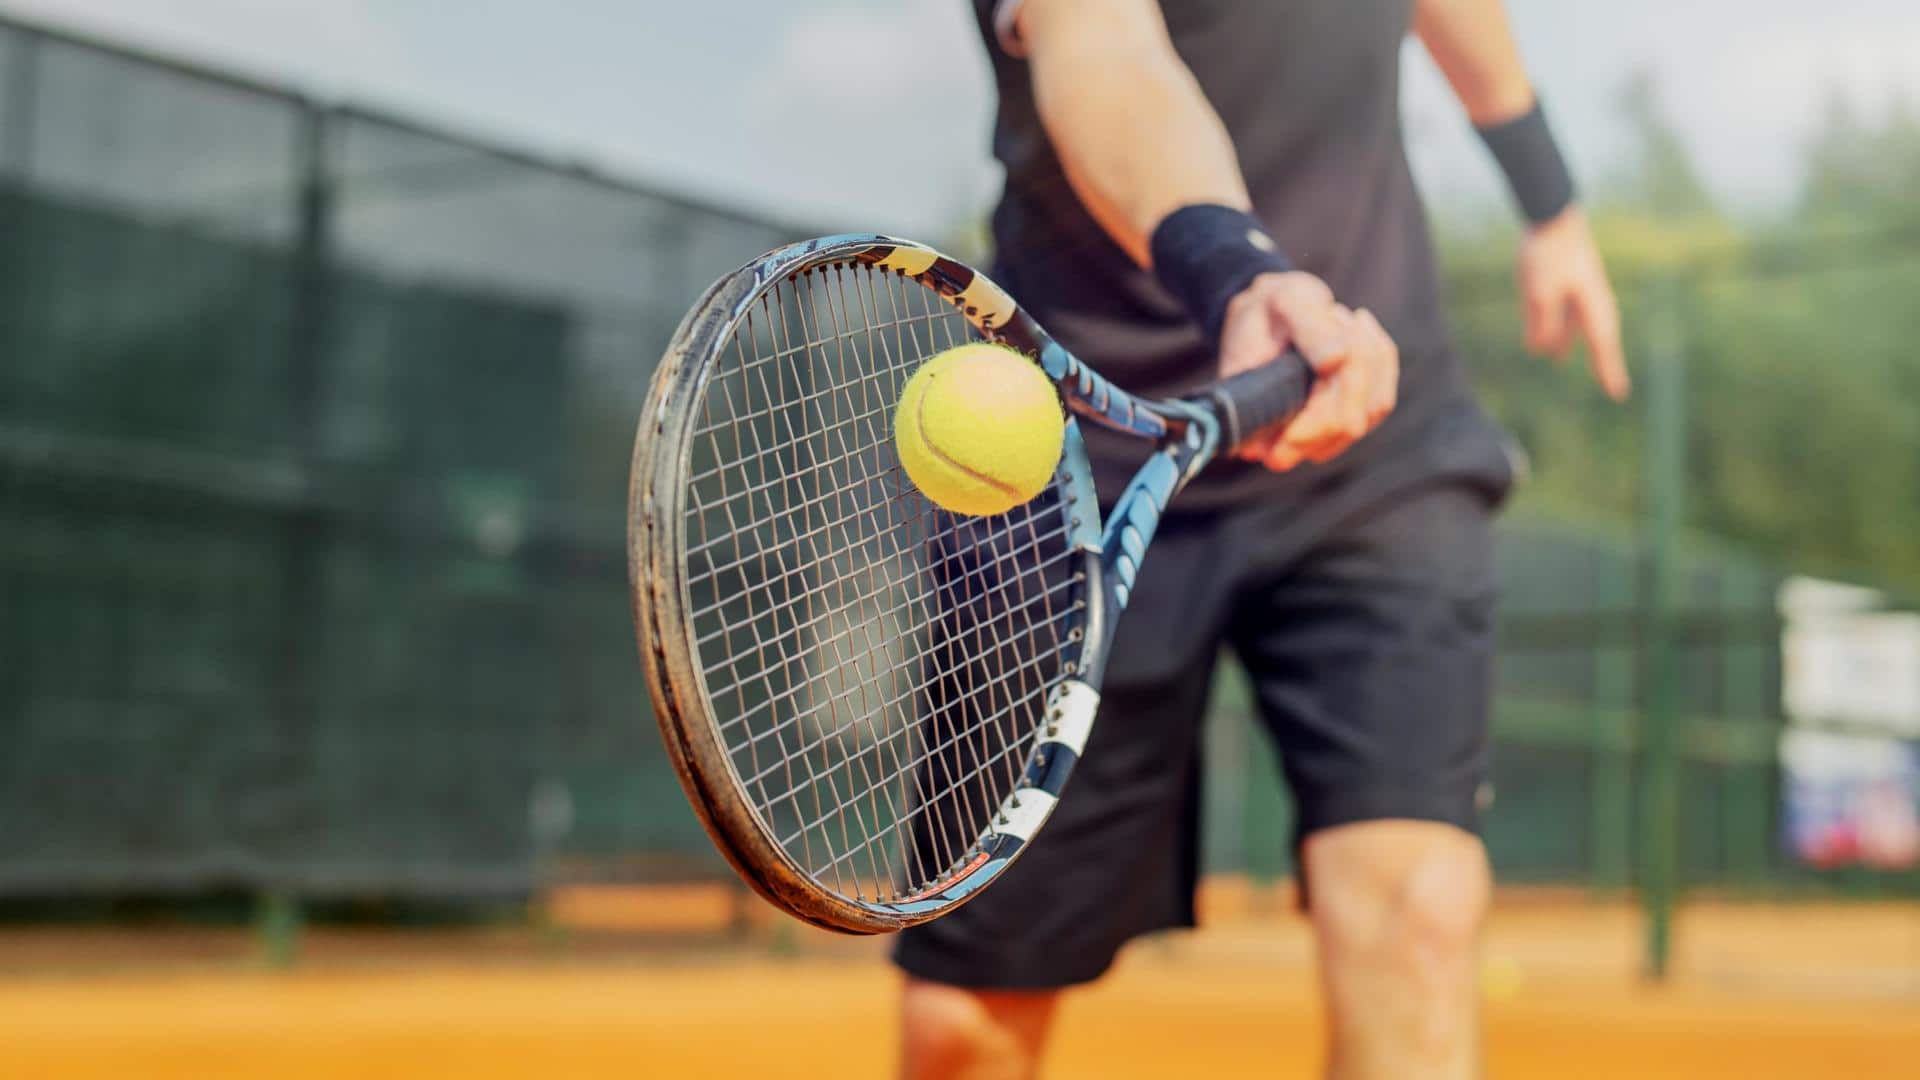 World Tennis Day: Here's why you should play tennis daily